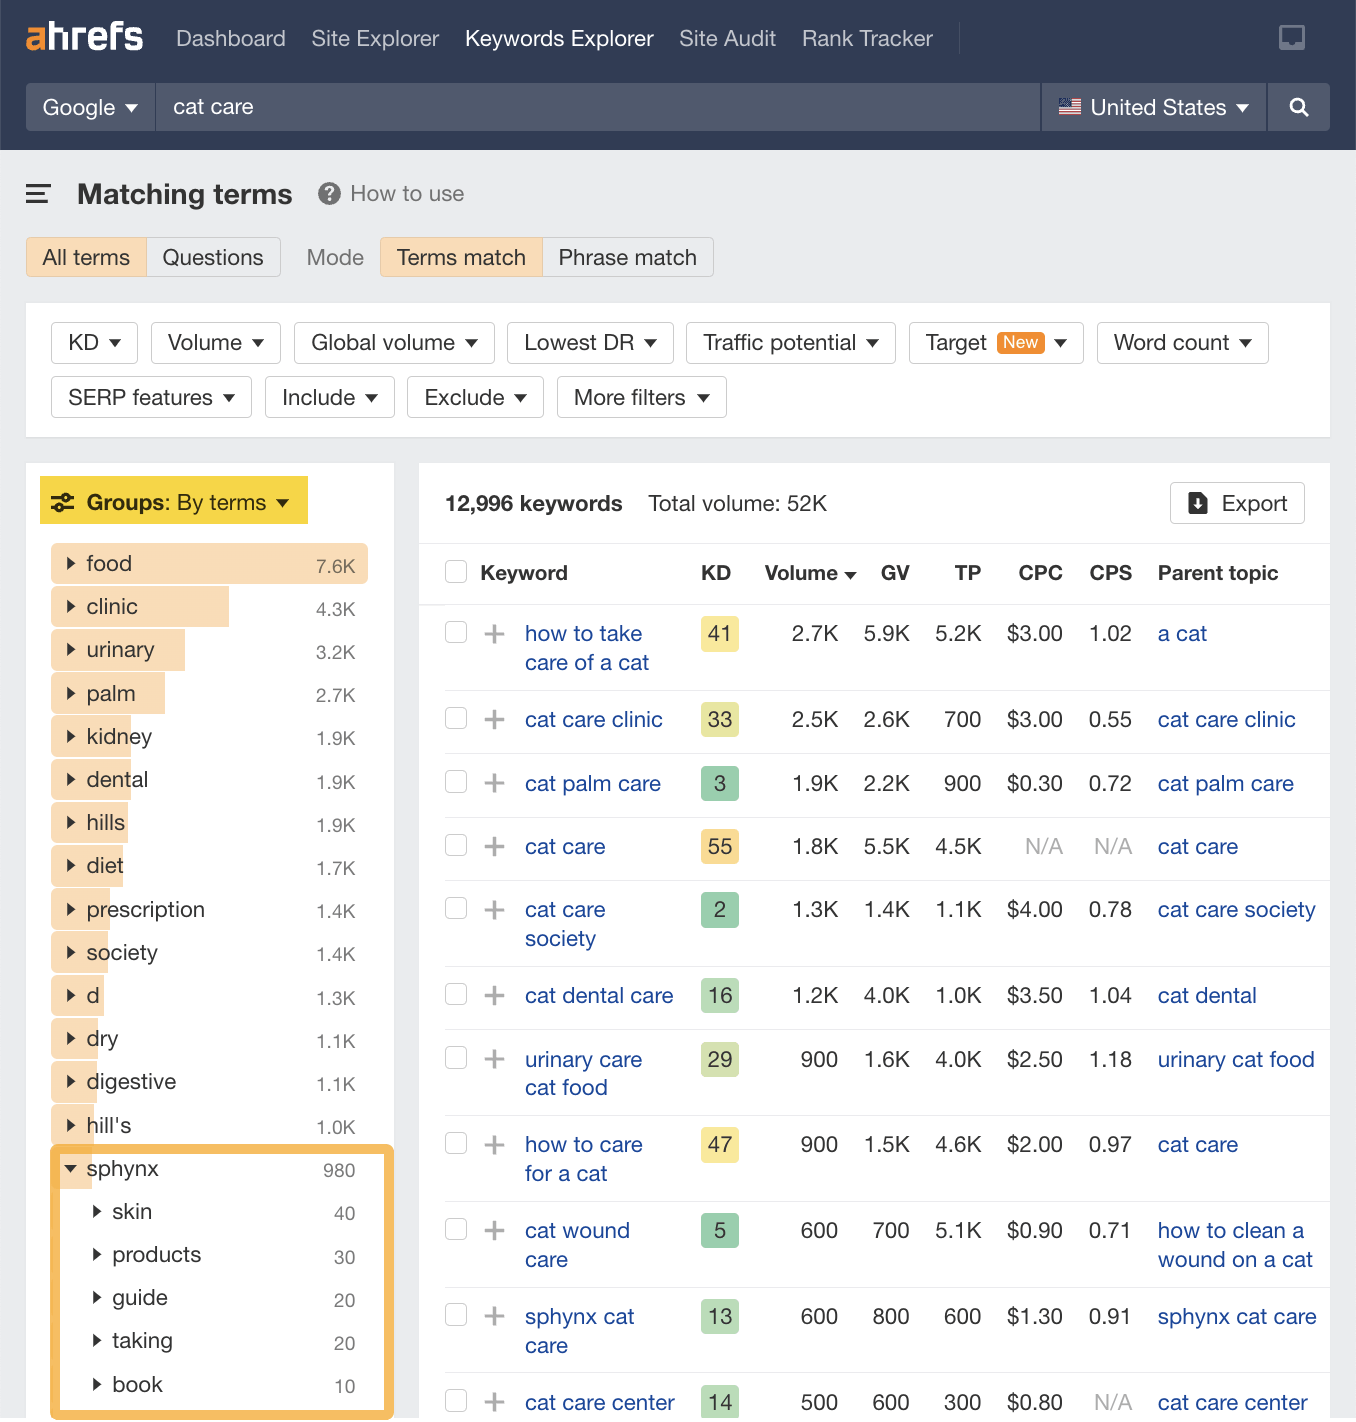 Keyword research groups using the Matching terms report, via Ahrefs' Site Explorer